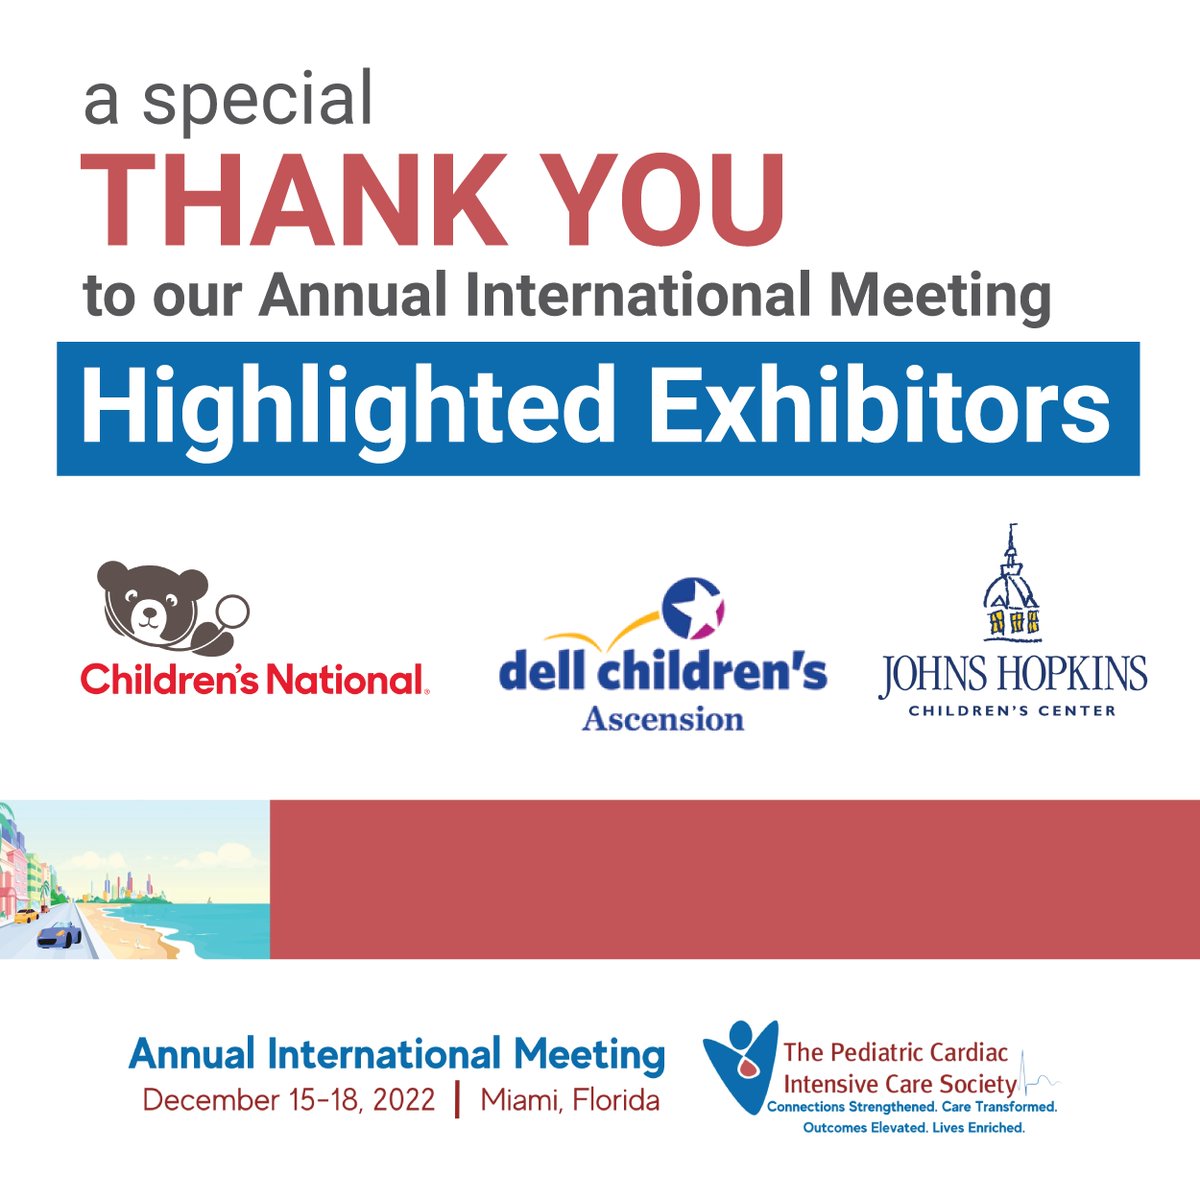 The PCICS Annual Meeting has begun, and we want to extend our gratitude and thanks to our Highlighted Exhibitors. #PCICS22